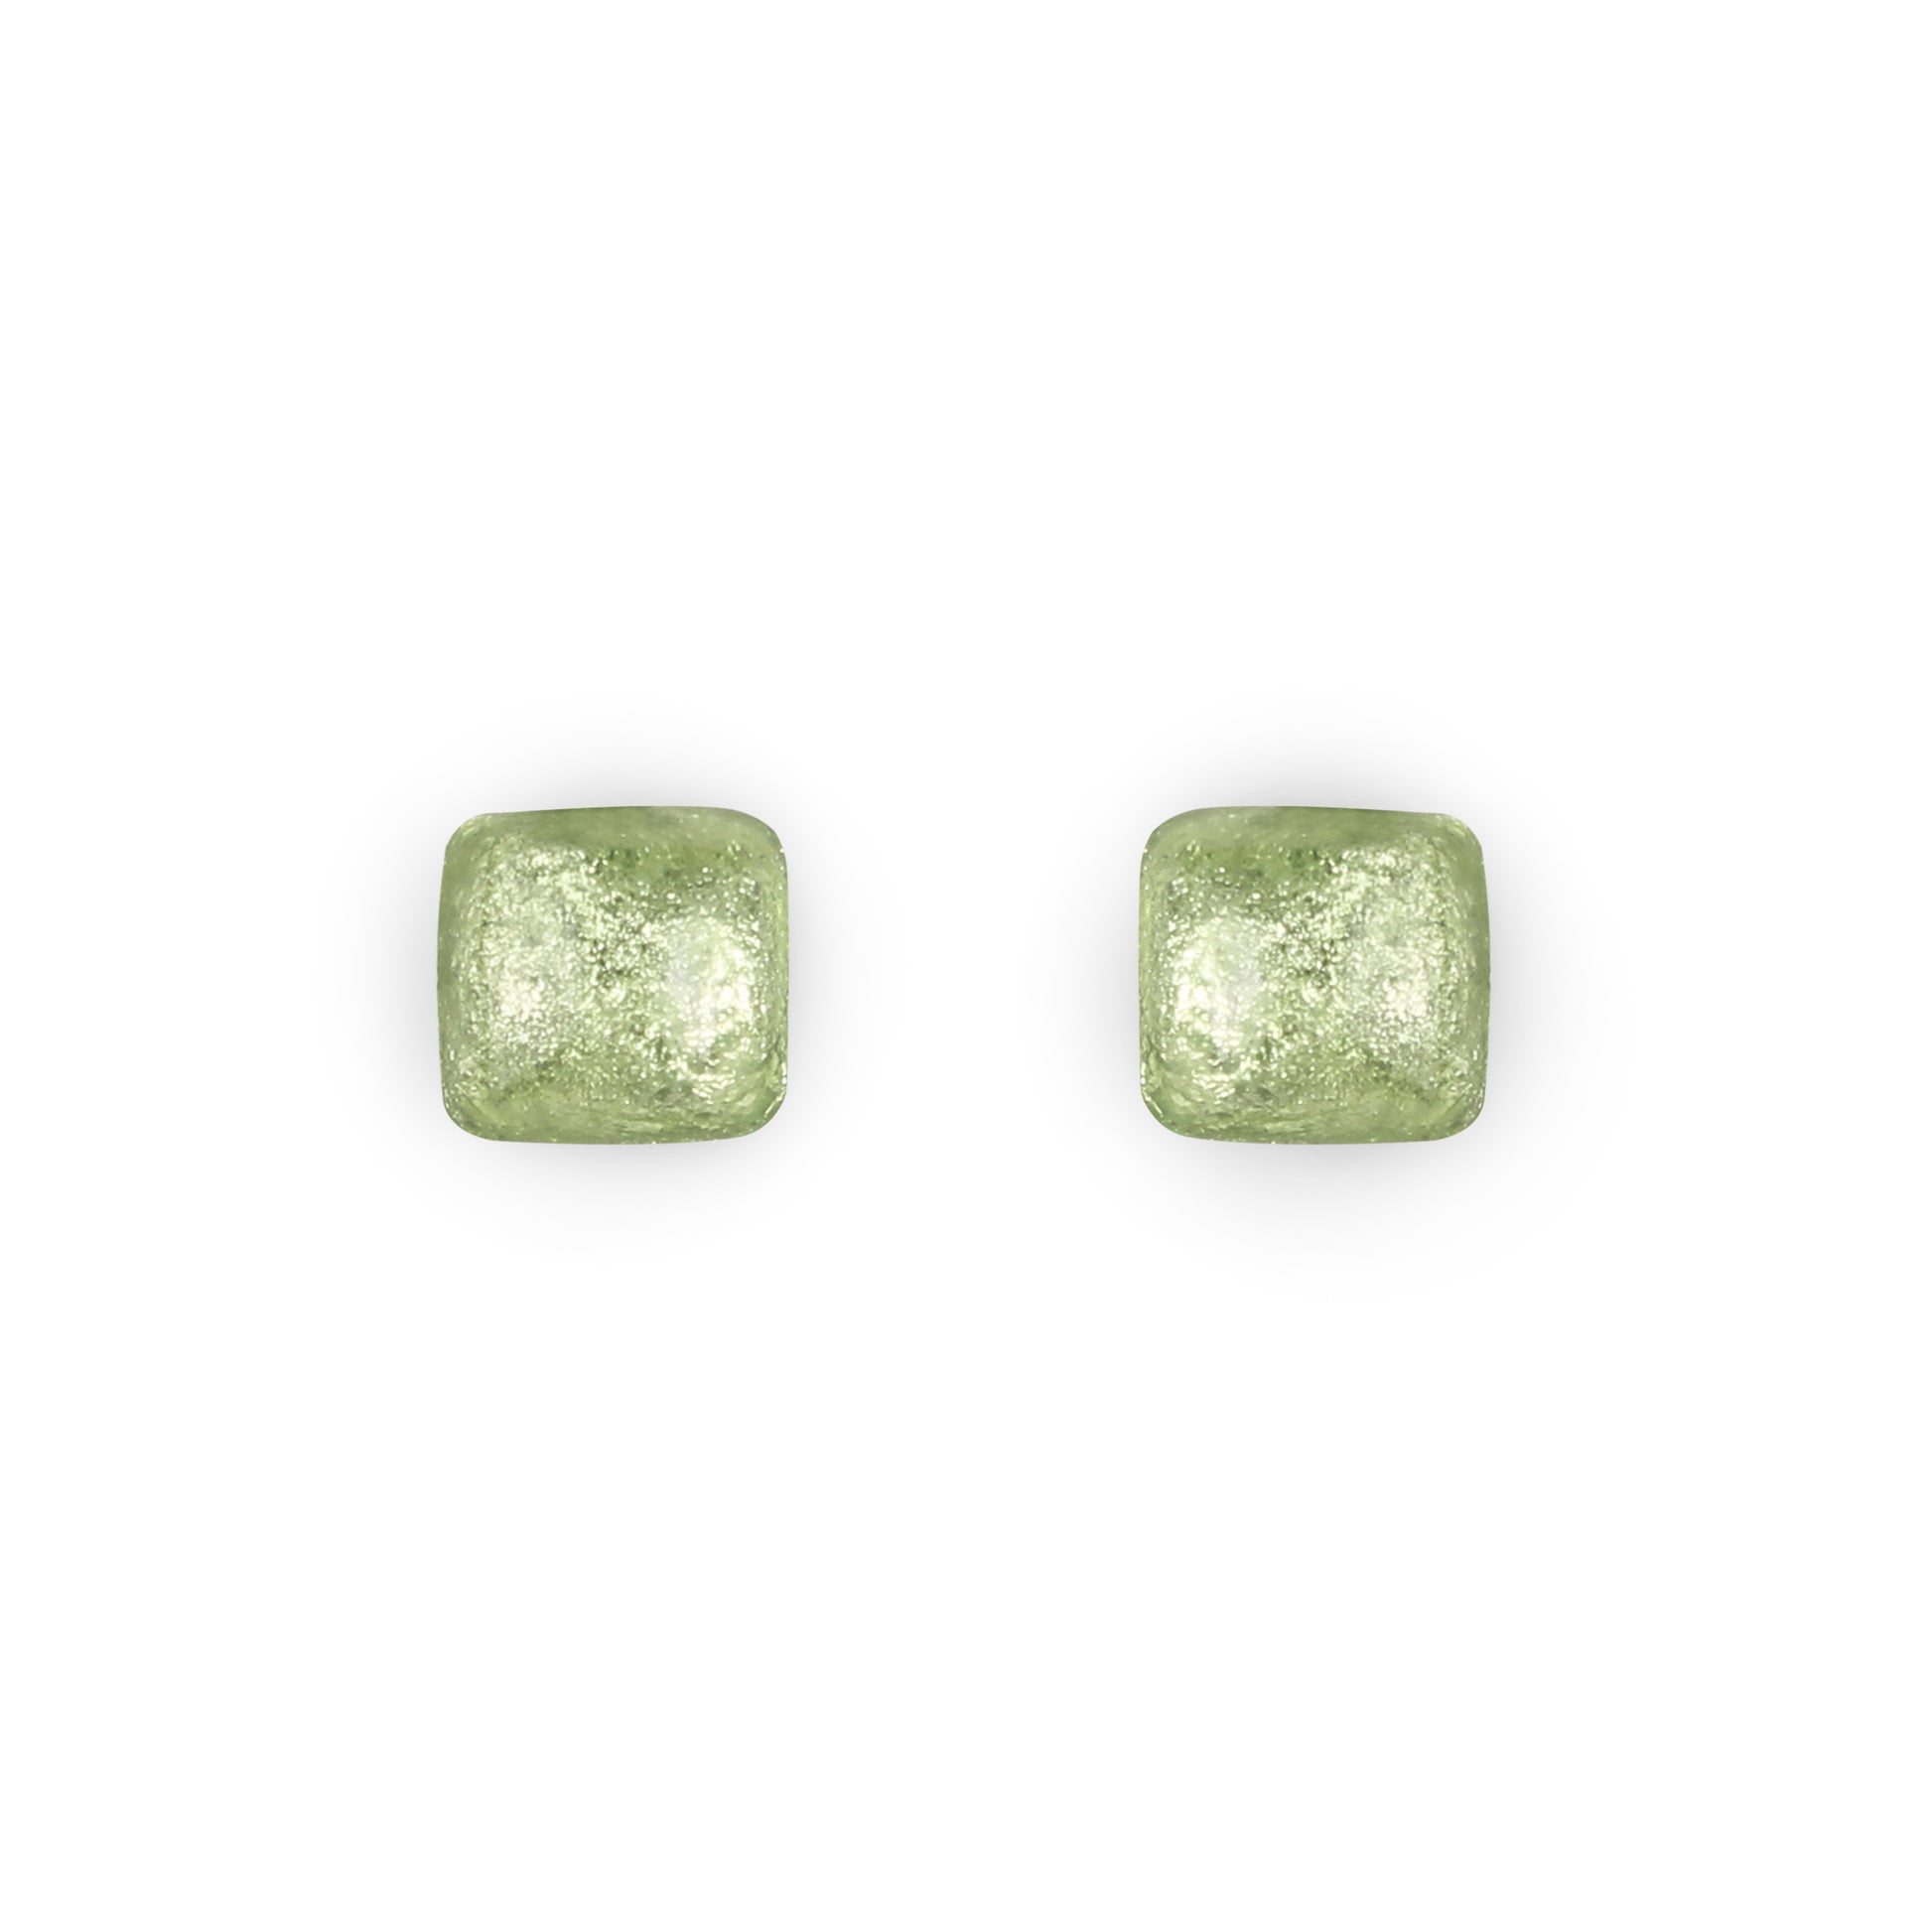 Orchard Cabouchon Squares Shiny Stud Earrings